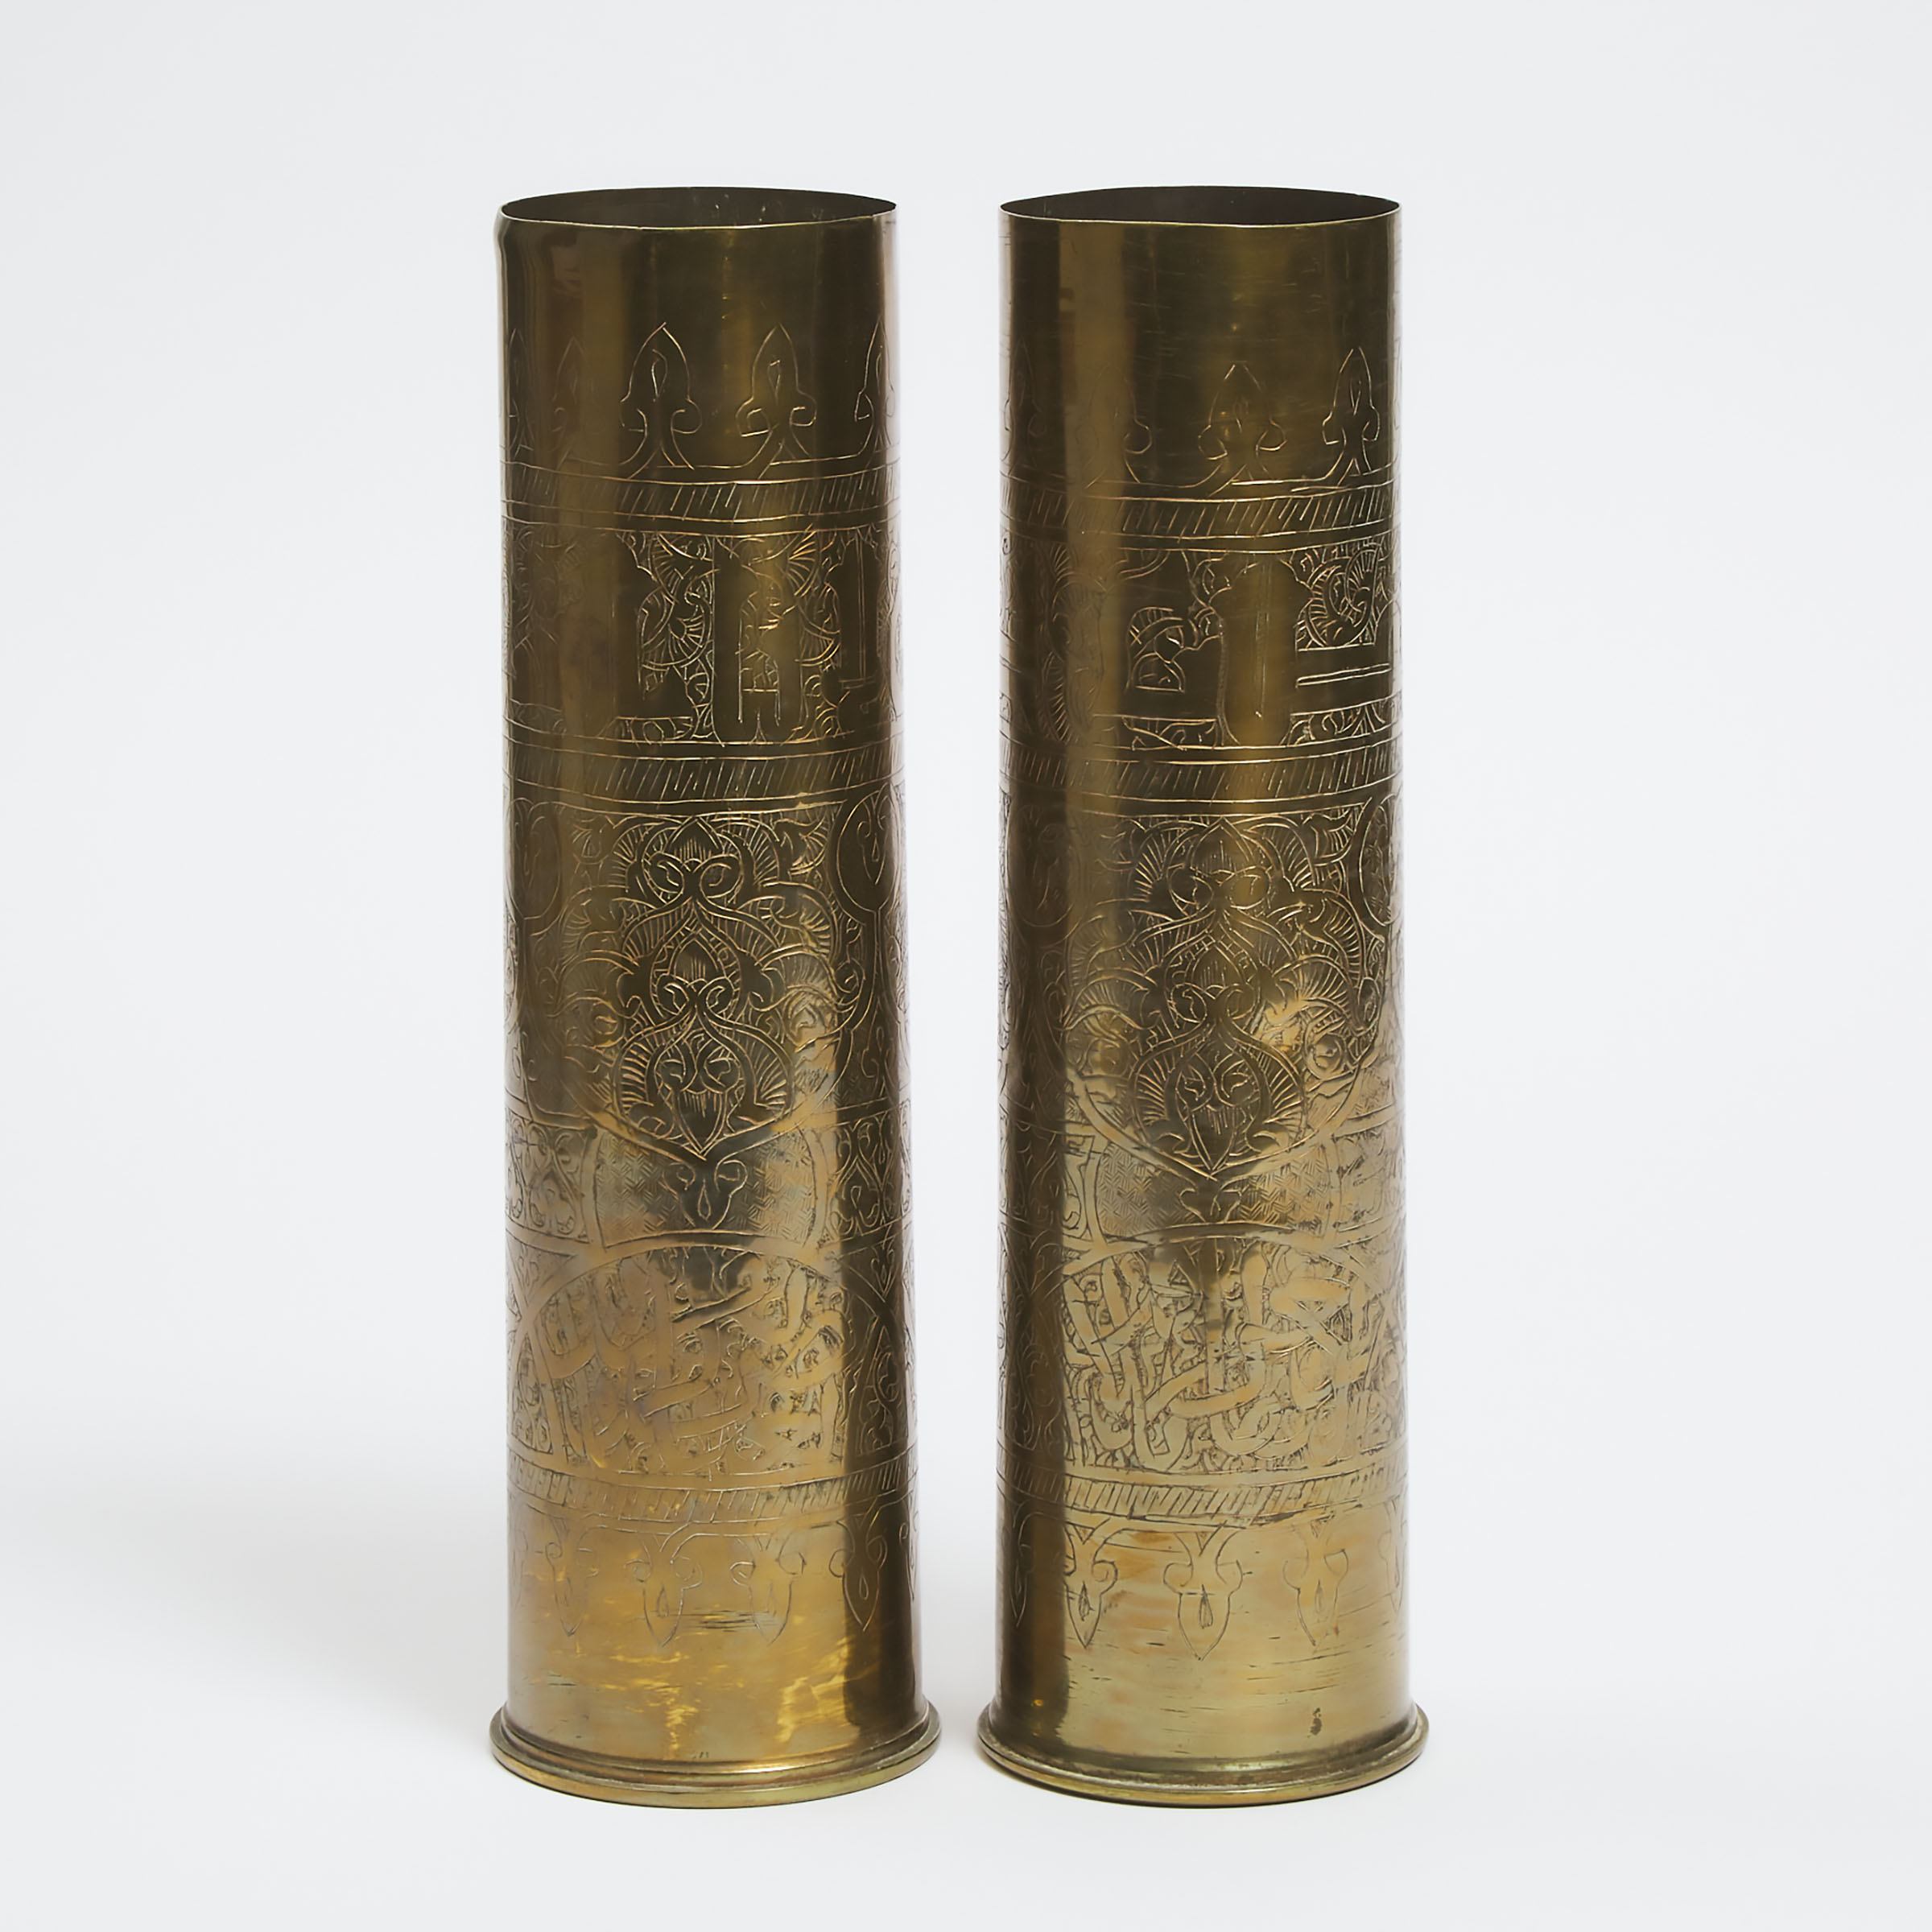 Pair of Middle Eastern 'Trench Art' Shell Casing Vases, early 20th century